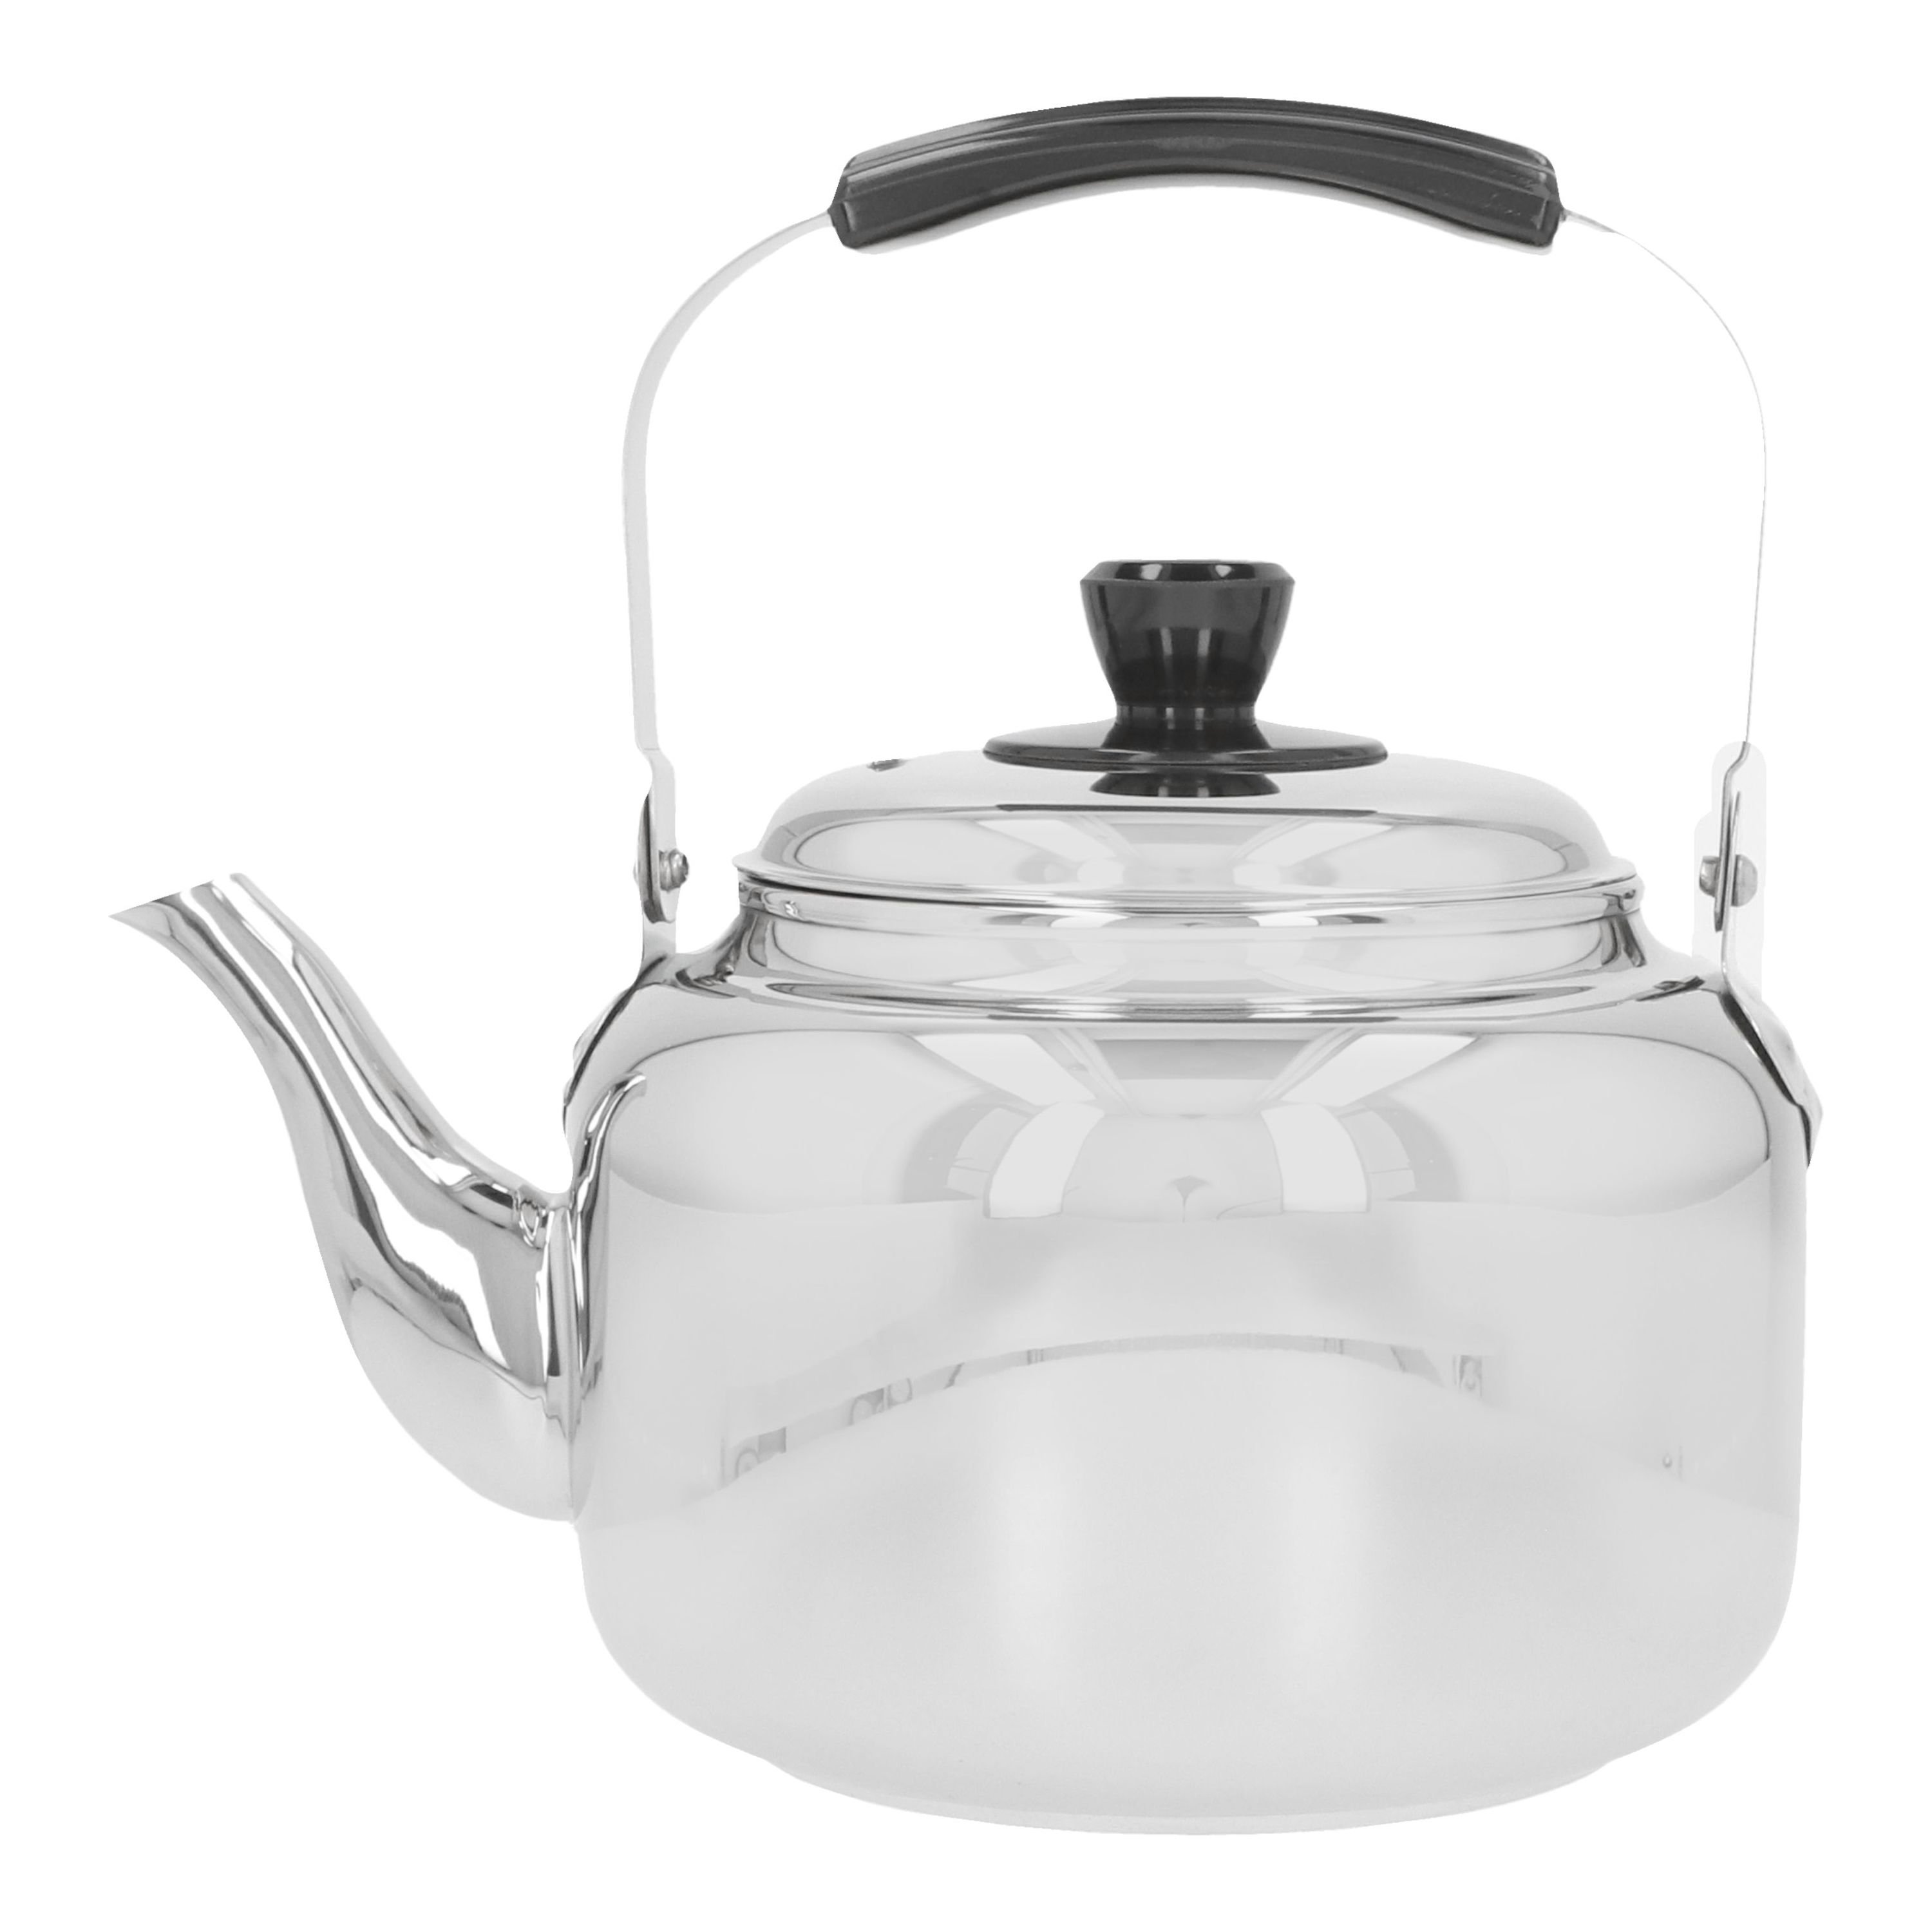 5 1/4 Qt. Stainless Steel Water Kettle Tea Pot This 5 1/4 Qt